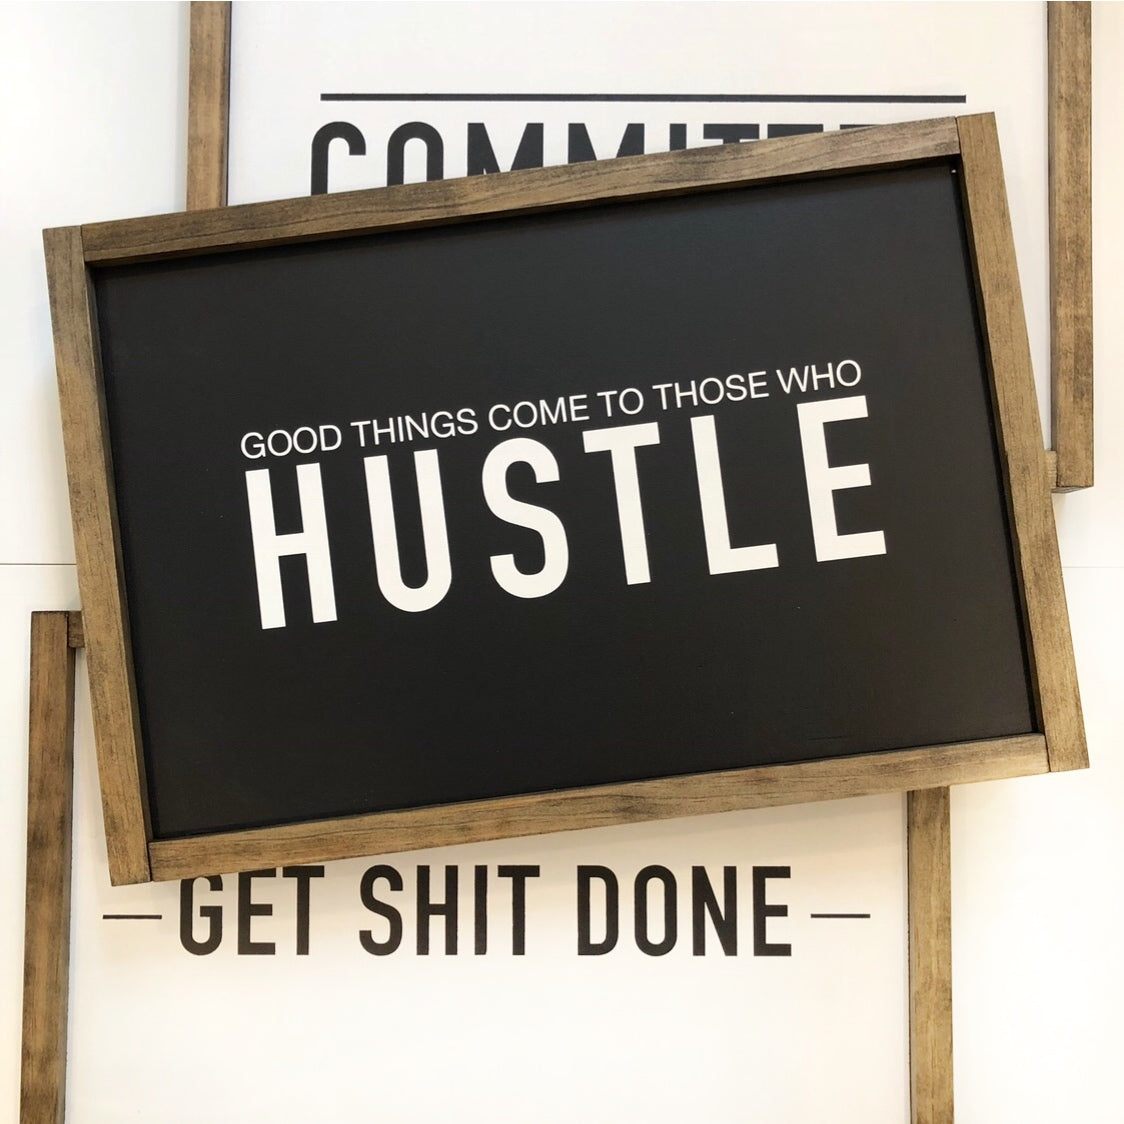 Good Things Come To Those Who Hustle